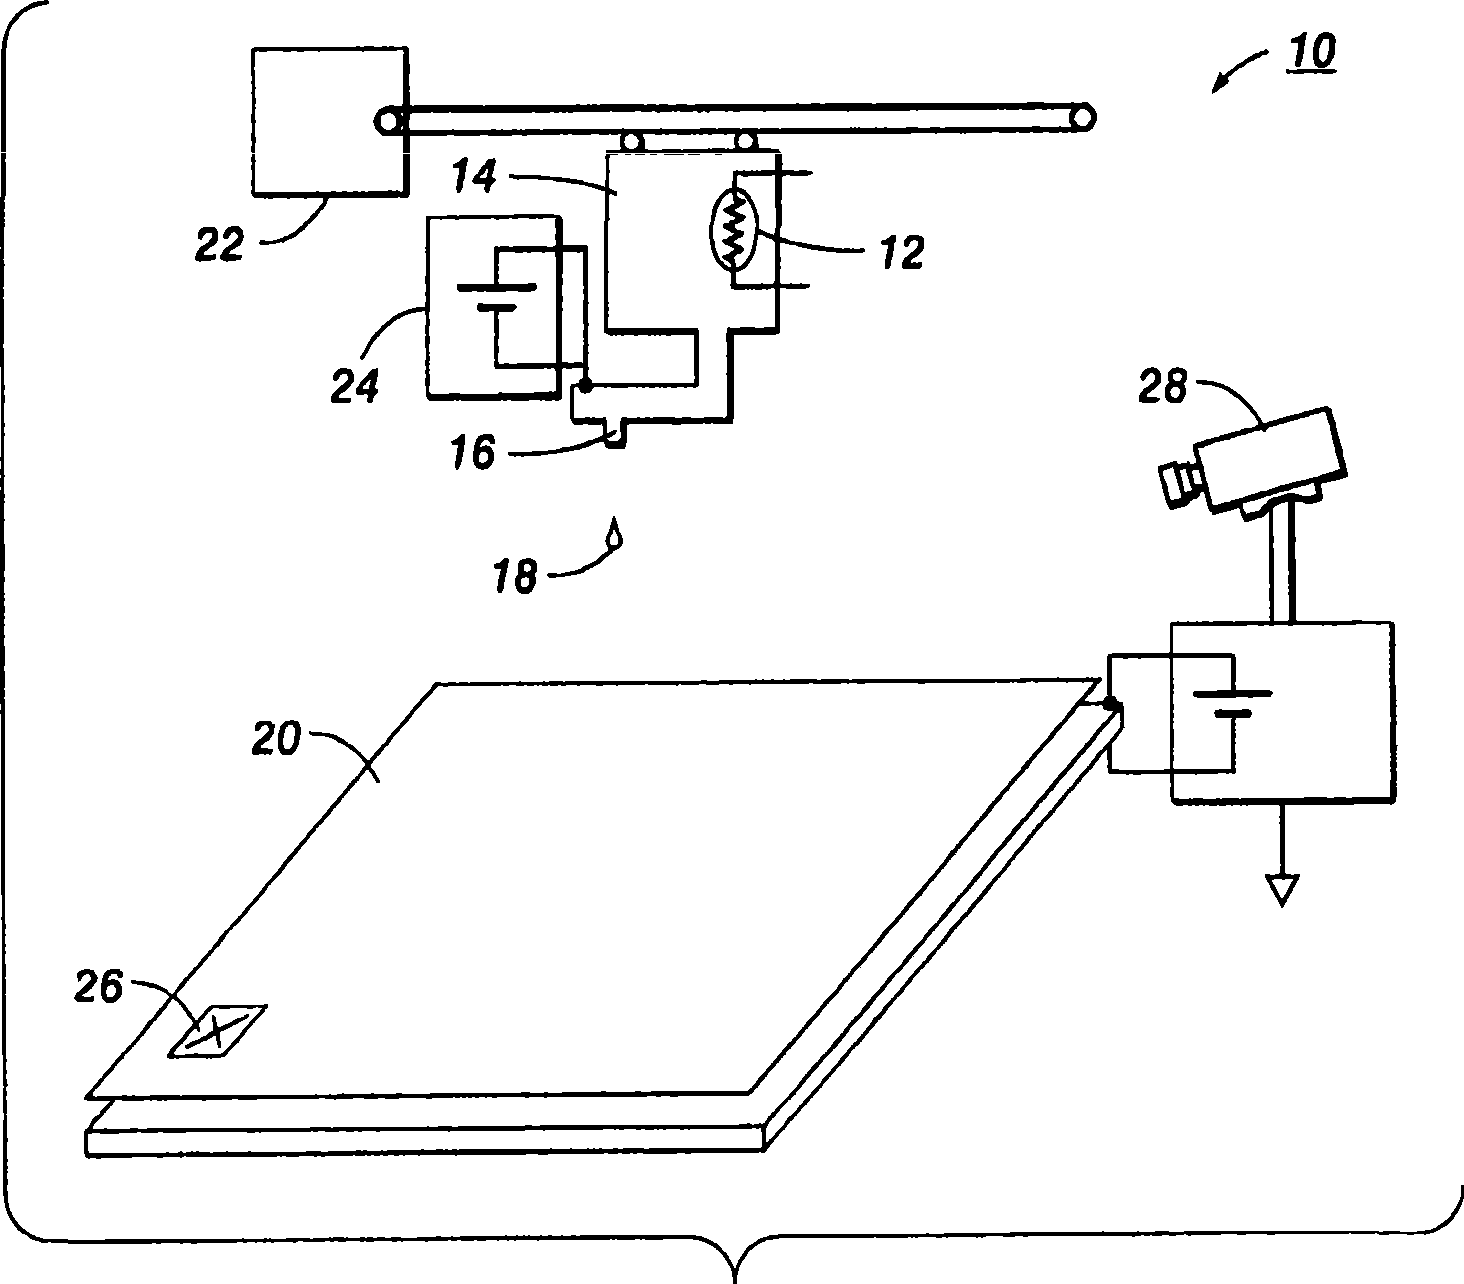 Method of forming conductive lines and similar features